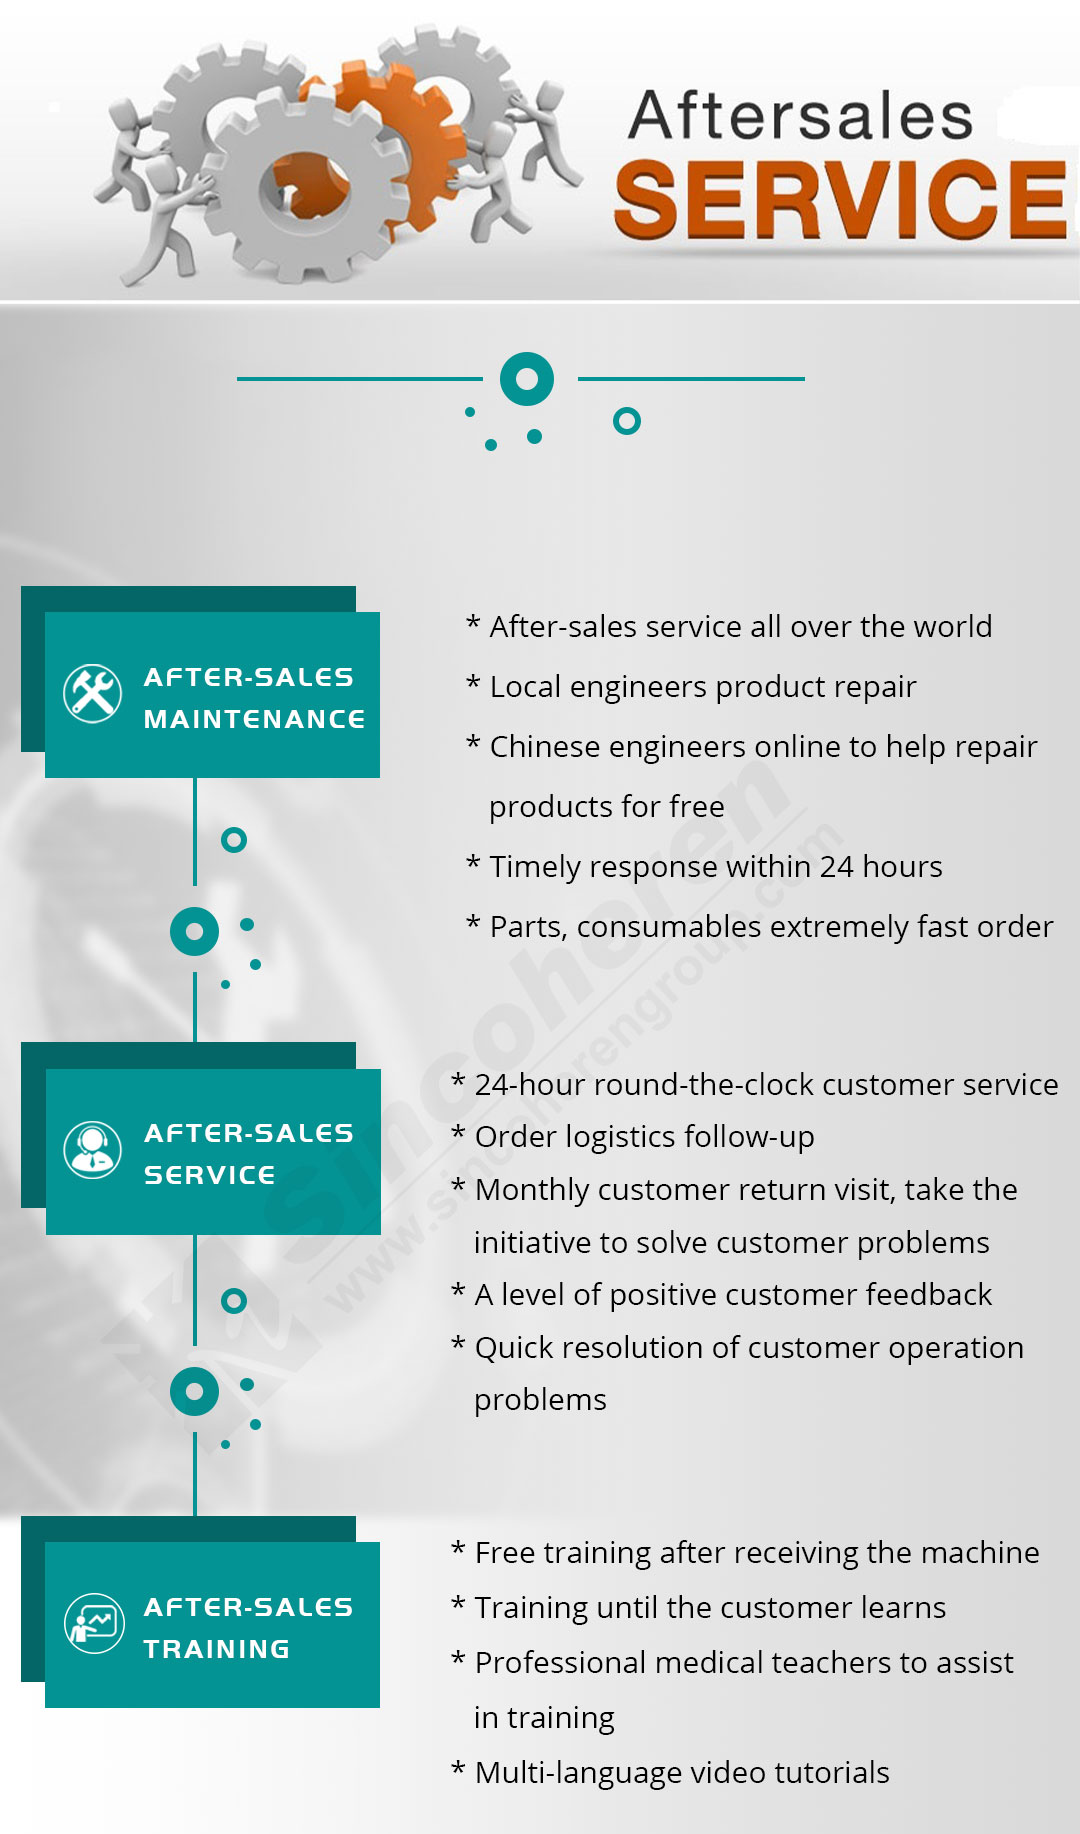 aftersales service